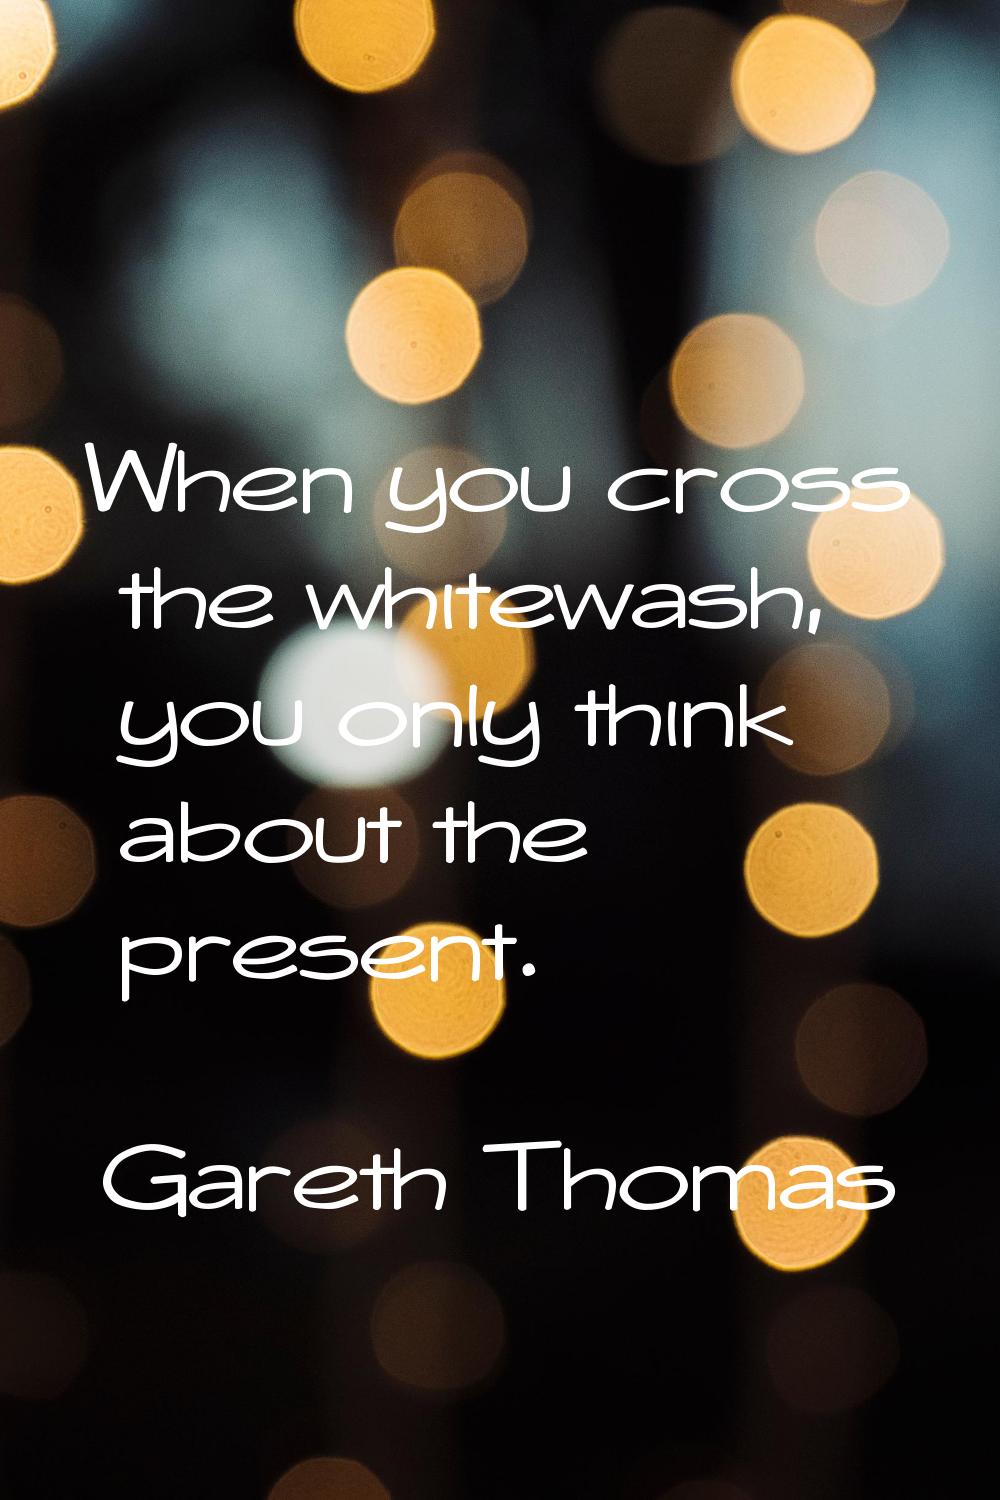 When you cross the whitewash, you only think about the present.